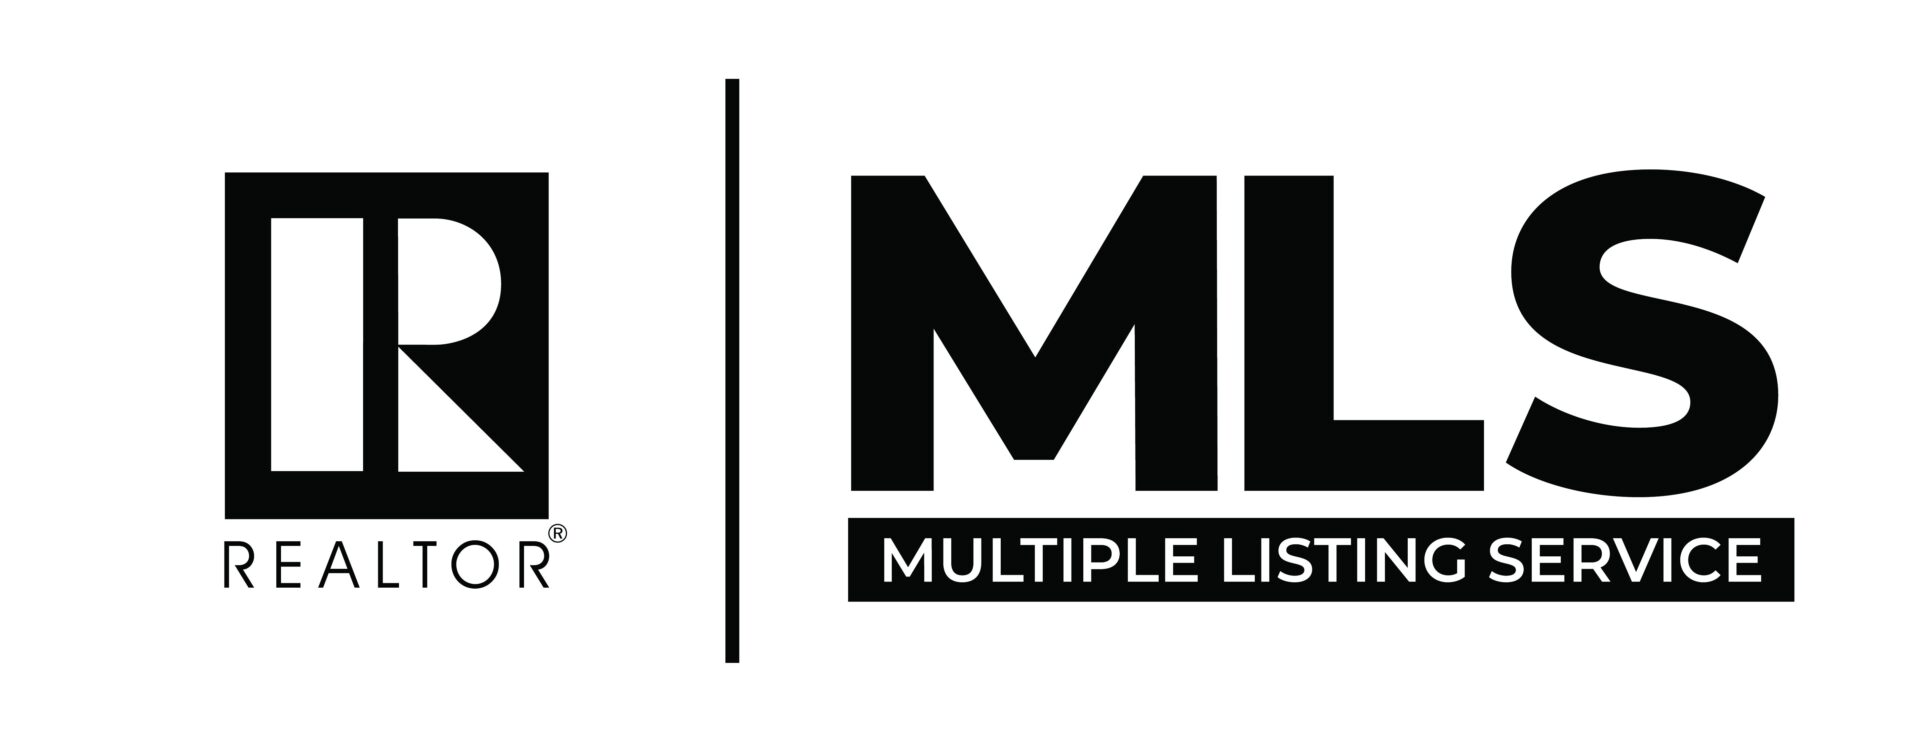 Multiple lists logo with a black and white background